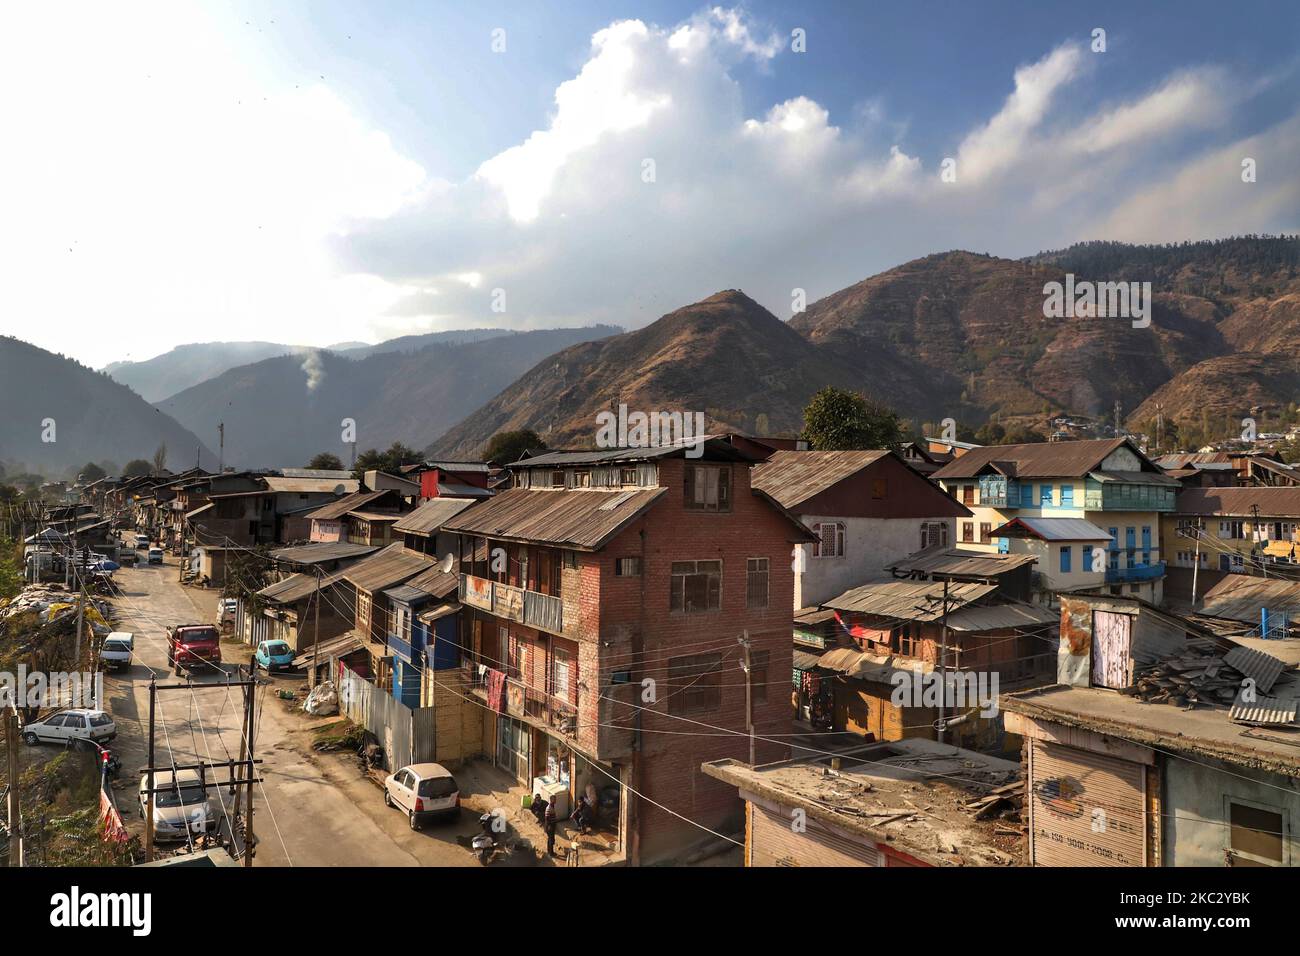 View of residential houses in District Baramulla, jammu and Kashmir, India on 30 October 2020. As the anger grows in Jammu and Kashmir over the new land laws, which allow any Indian citizen to buy land in the Union territory, the separatist Hurriyat Conference on Wednesday broke its silence and called for a one-day shutdown on October 31 to protest the â€œanti-people movesâ€ by New Delhi. (Photo by Nasir Kachroo/NurPhoto) Stock Photo